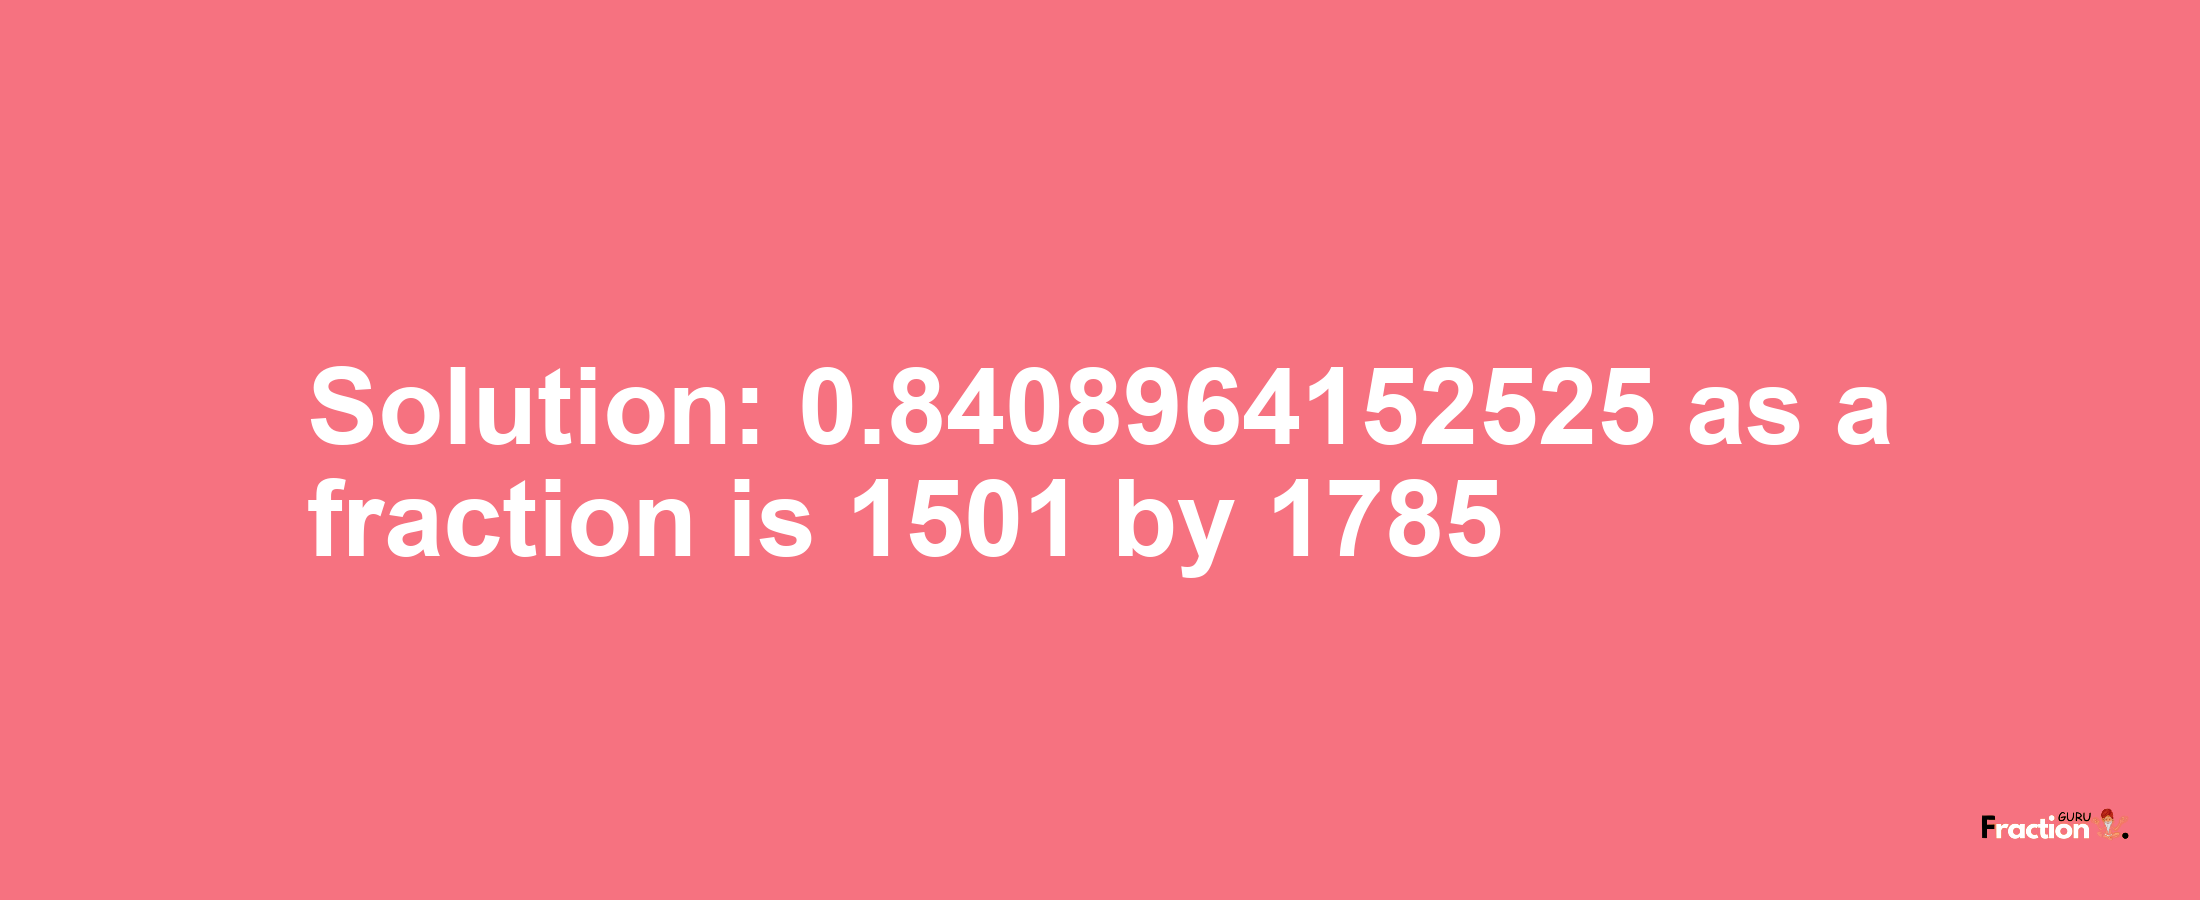 Solution:0.8408964152525 as a fraction is 1501/1785